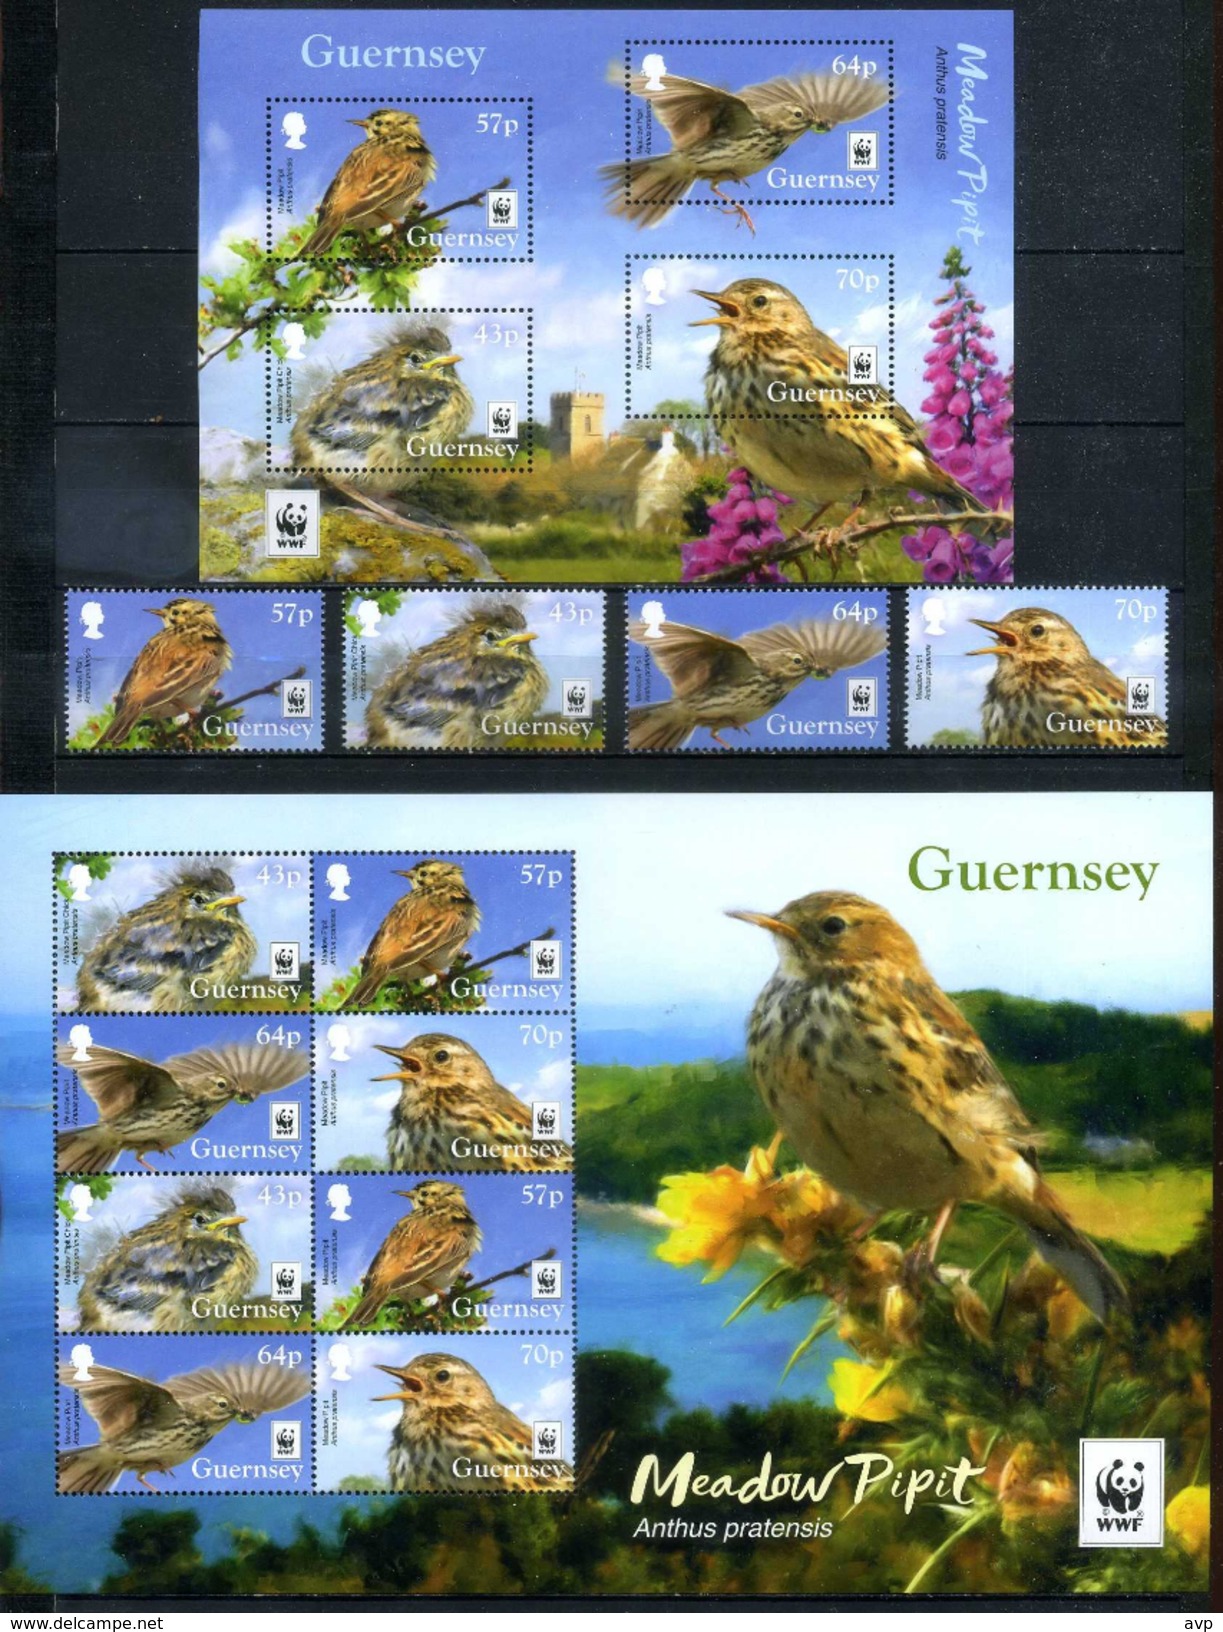 Guernsey 2017 WWF, Fauna, Birds, Meadow Pipit - Unused Stamps